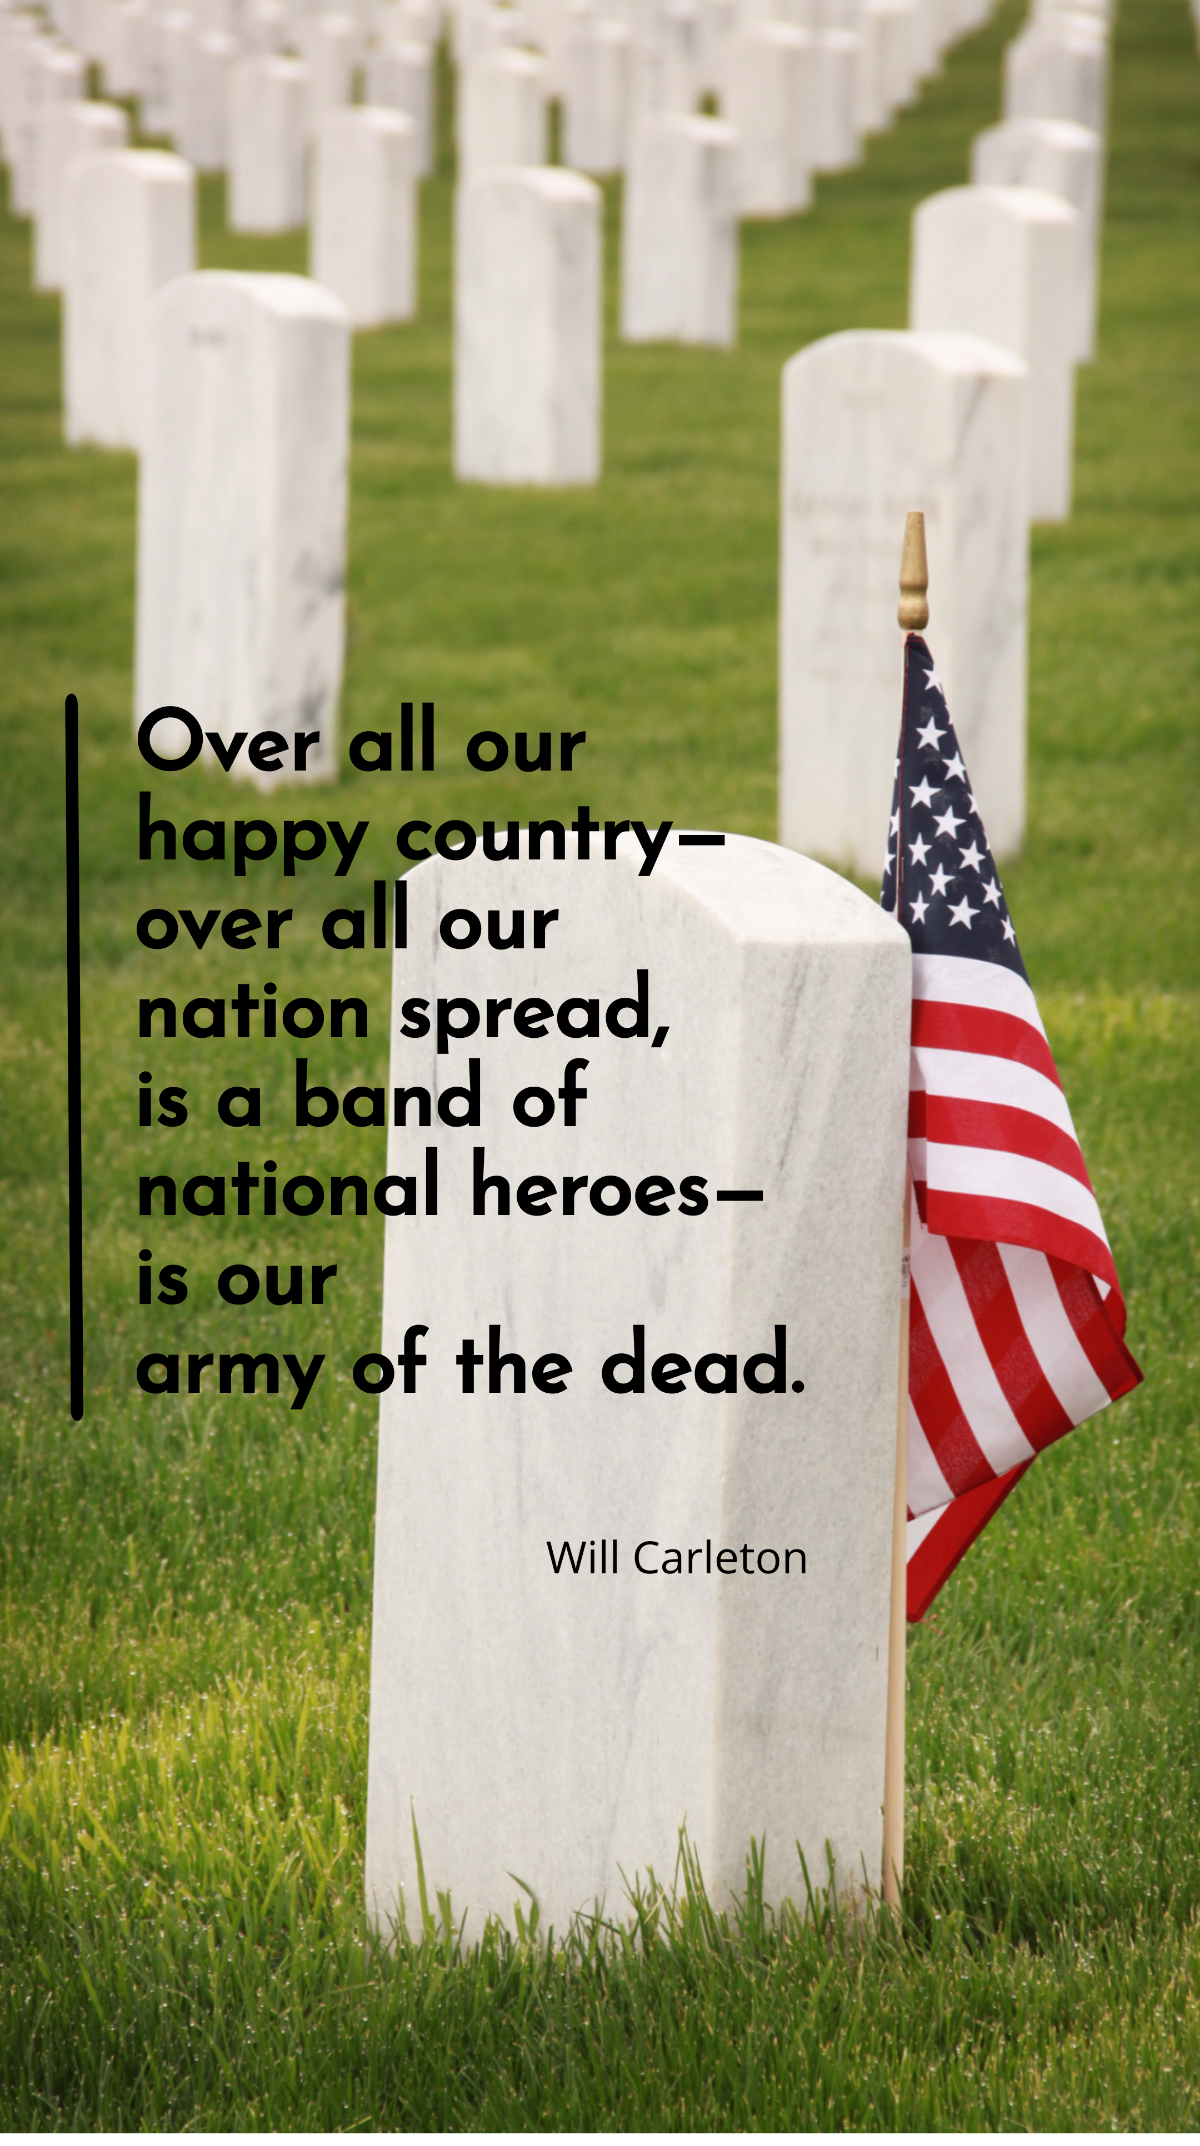 Will Carleton - Over all our happy country - over all our nation spread, is a band of national heroes - is our army of the dead. Template